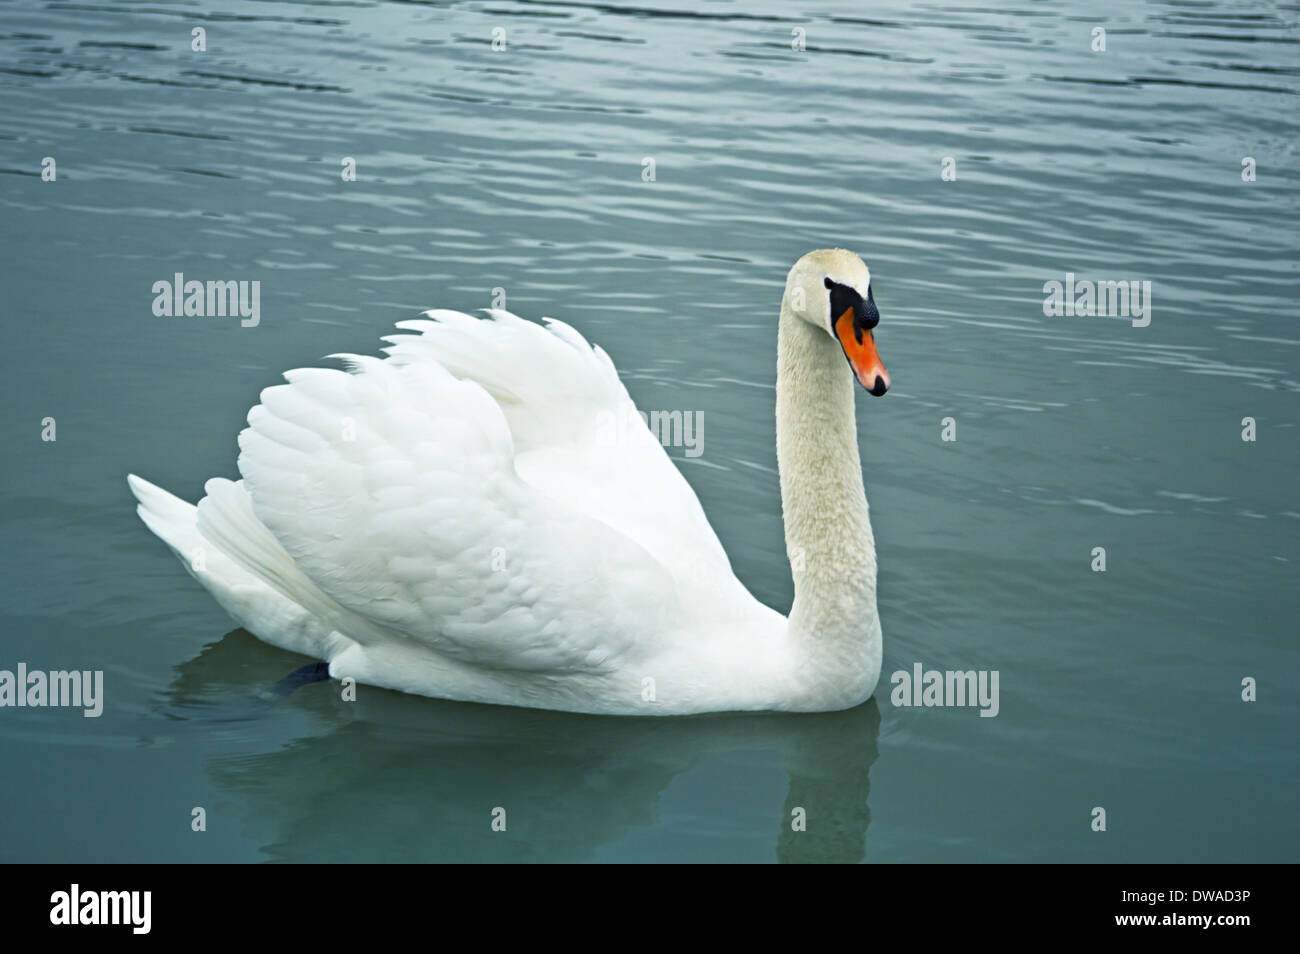 Beautiful swan in the water with reflection. Stock Photo